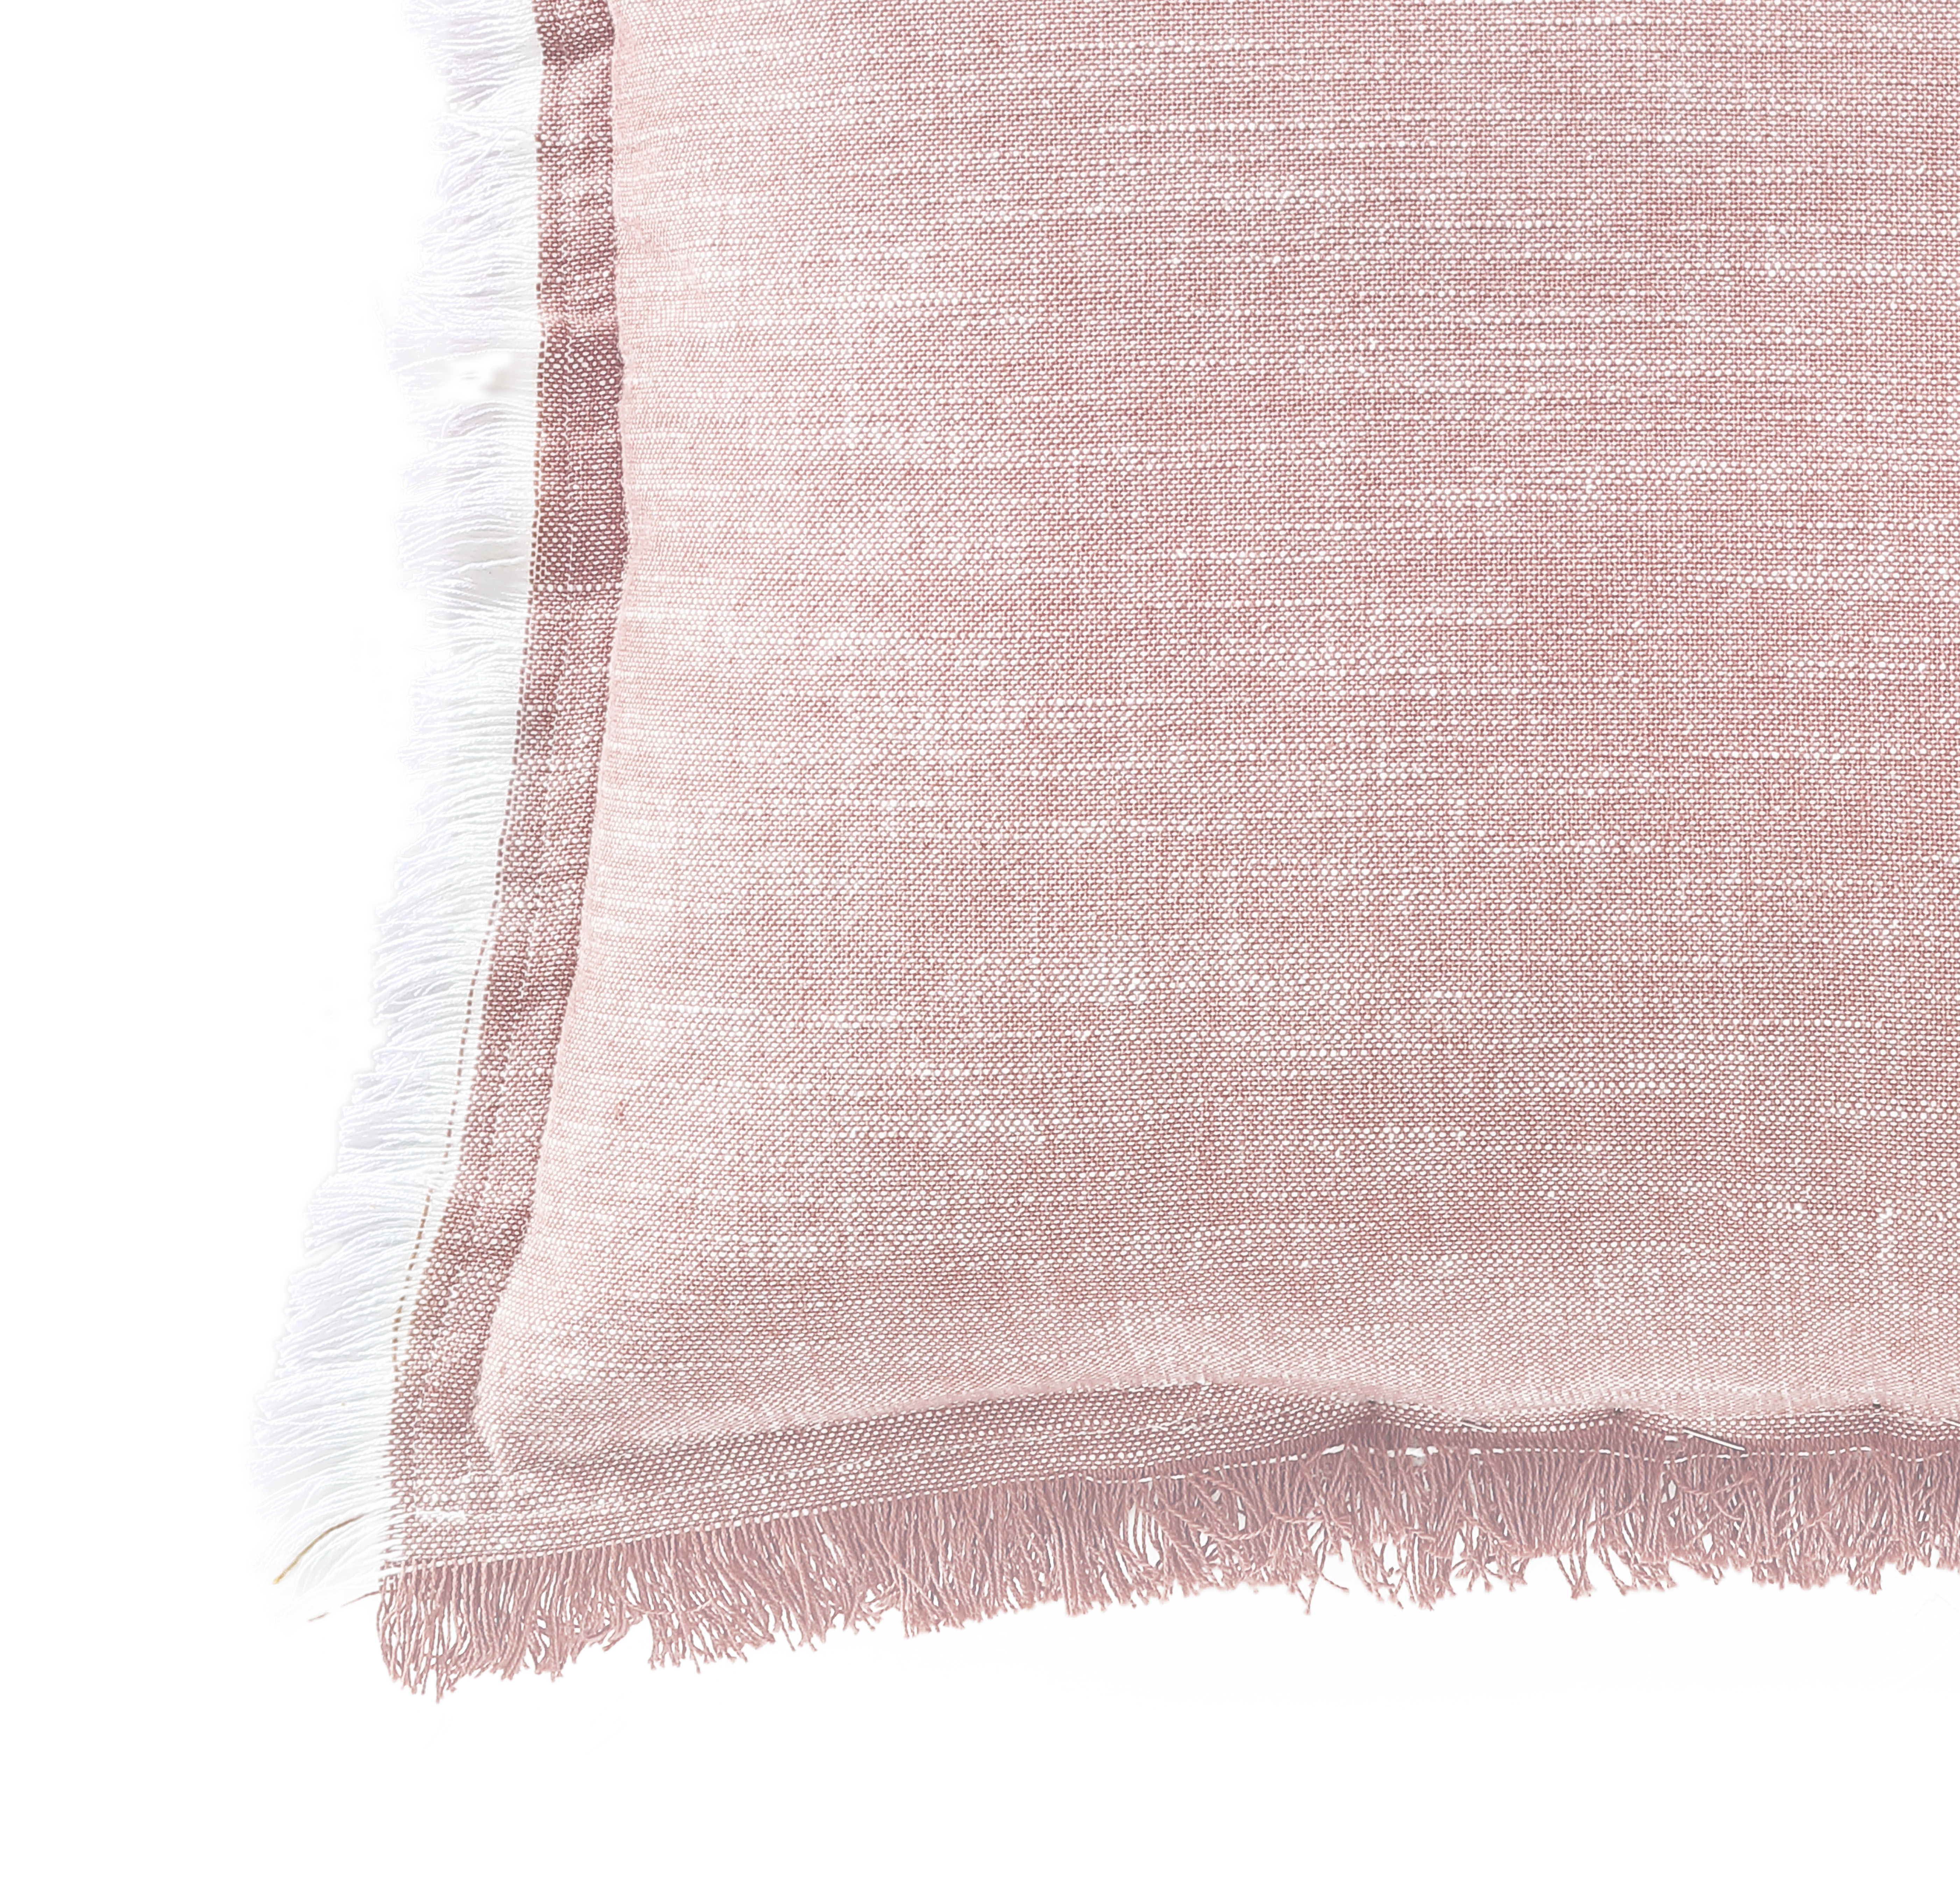 Better Homes & Gardens, Blush Throw Pillows, Square, 20" x 20", Rose Blush, 2 Pack - image 3 of 5